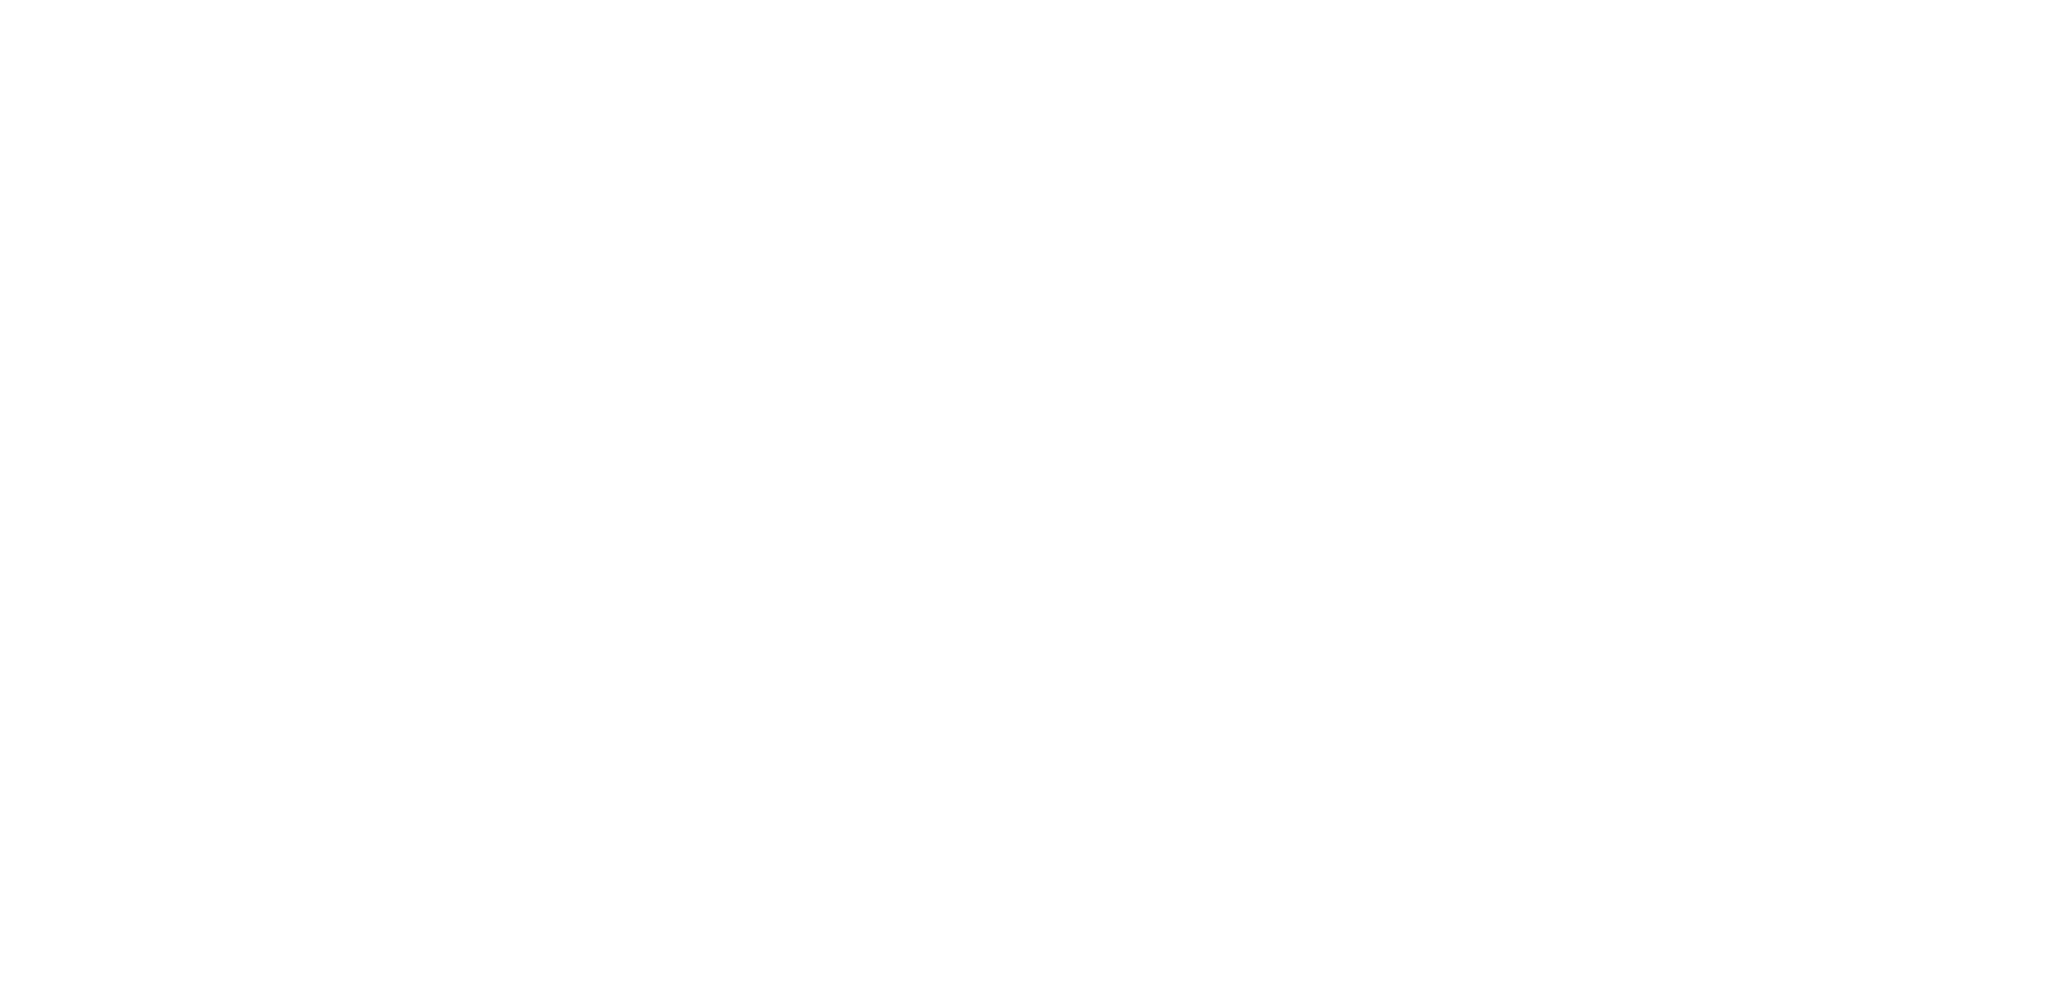 NEOS Funds